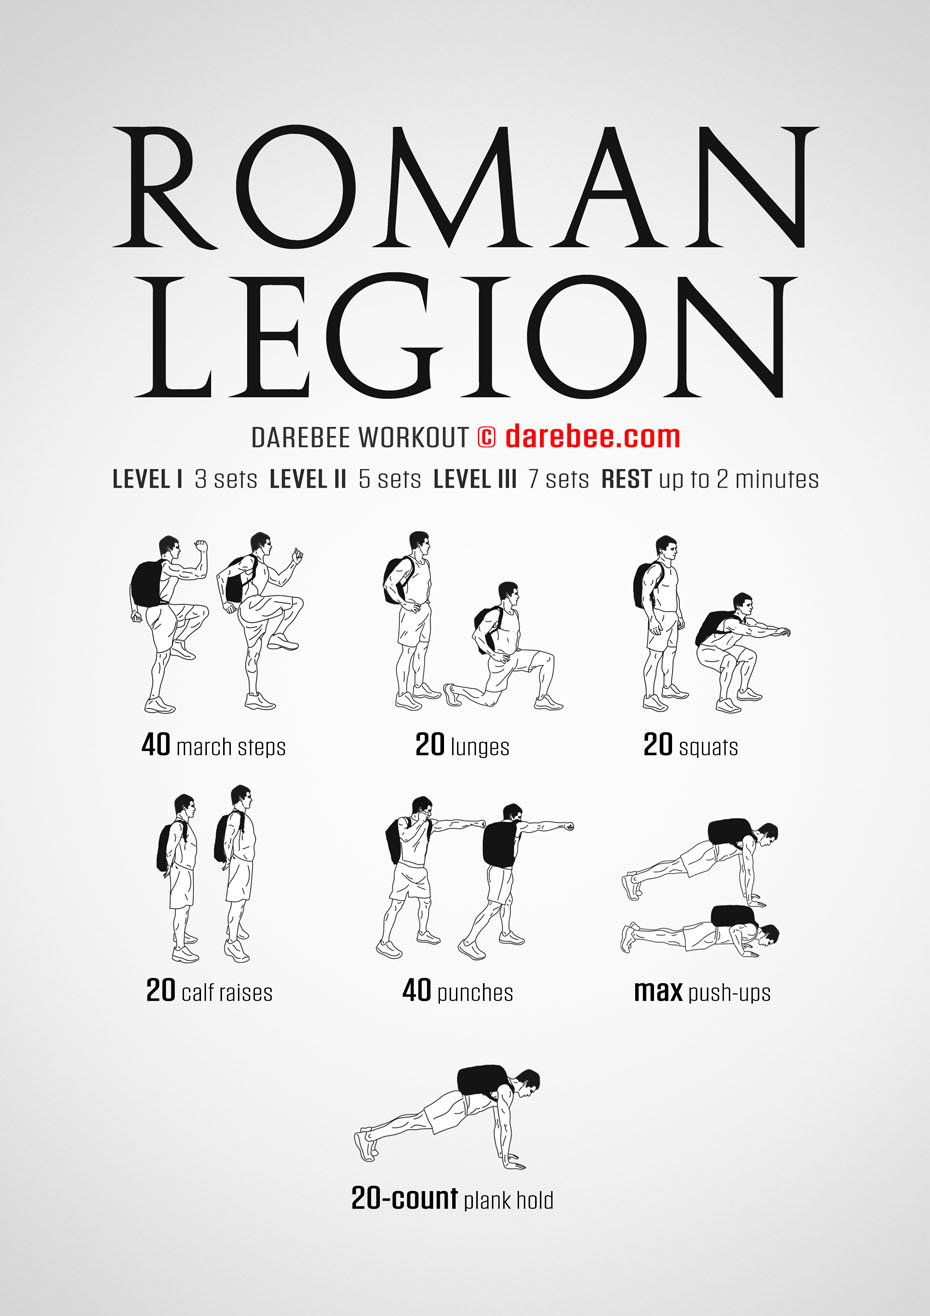 Roman Legion is a Darebee home-fitness, total body strength workout designed to make you stronger and fitter.